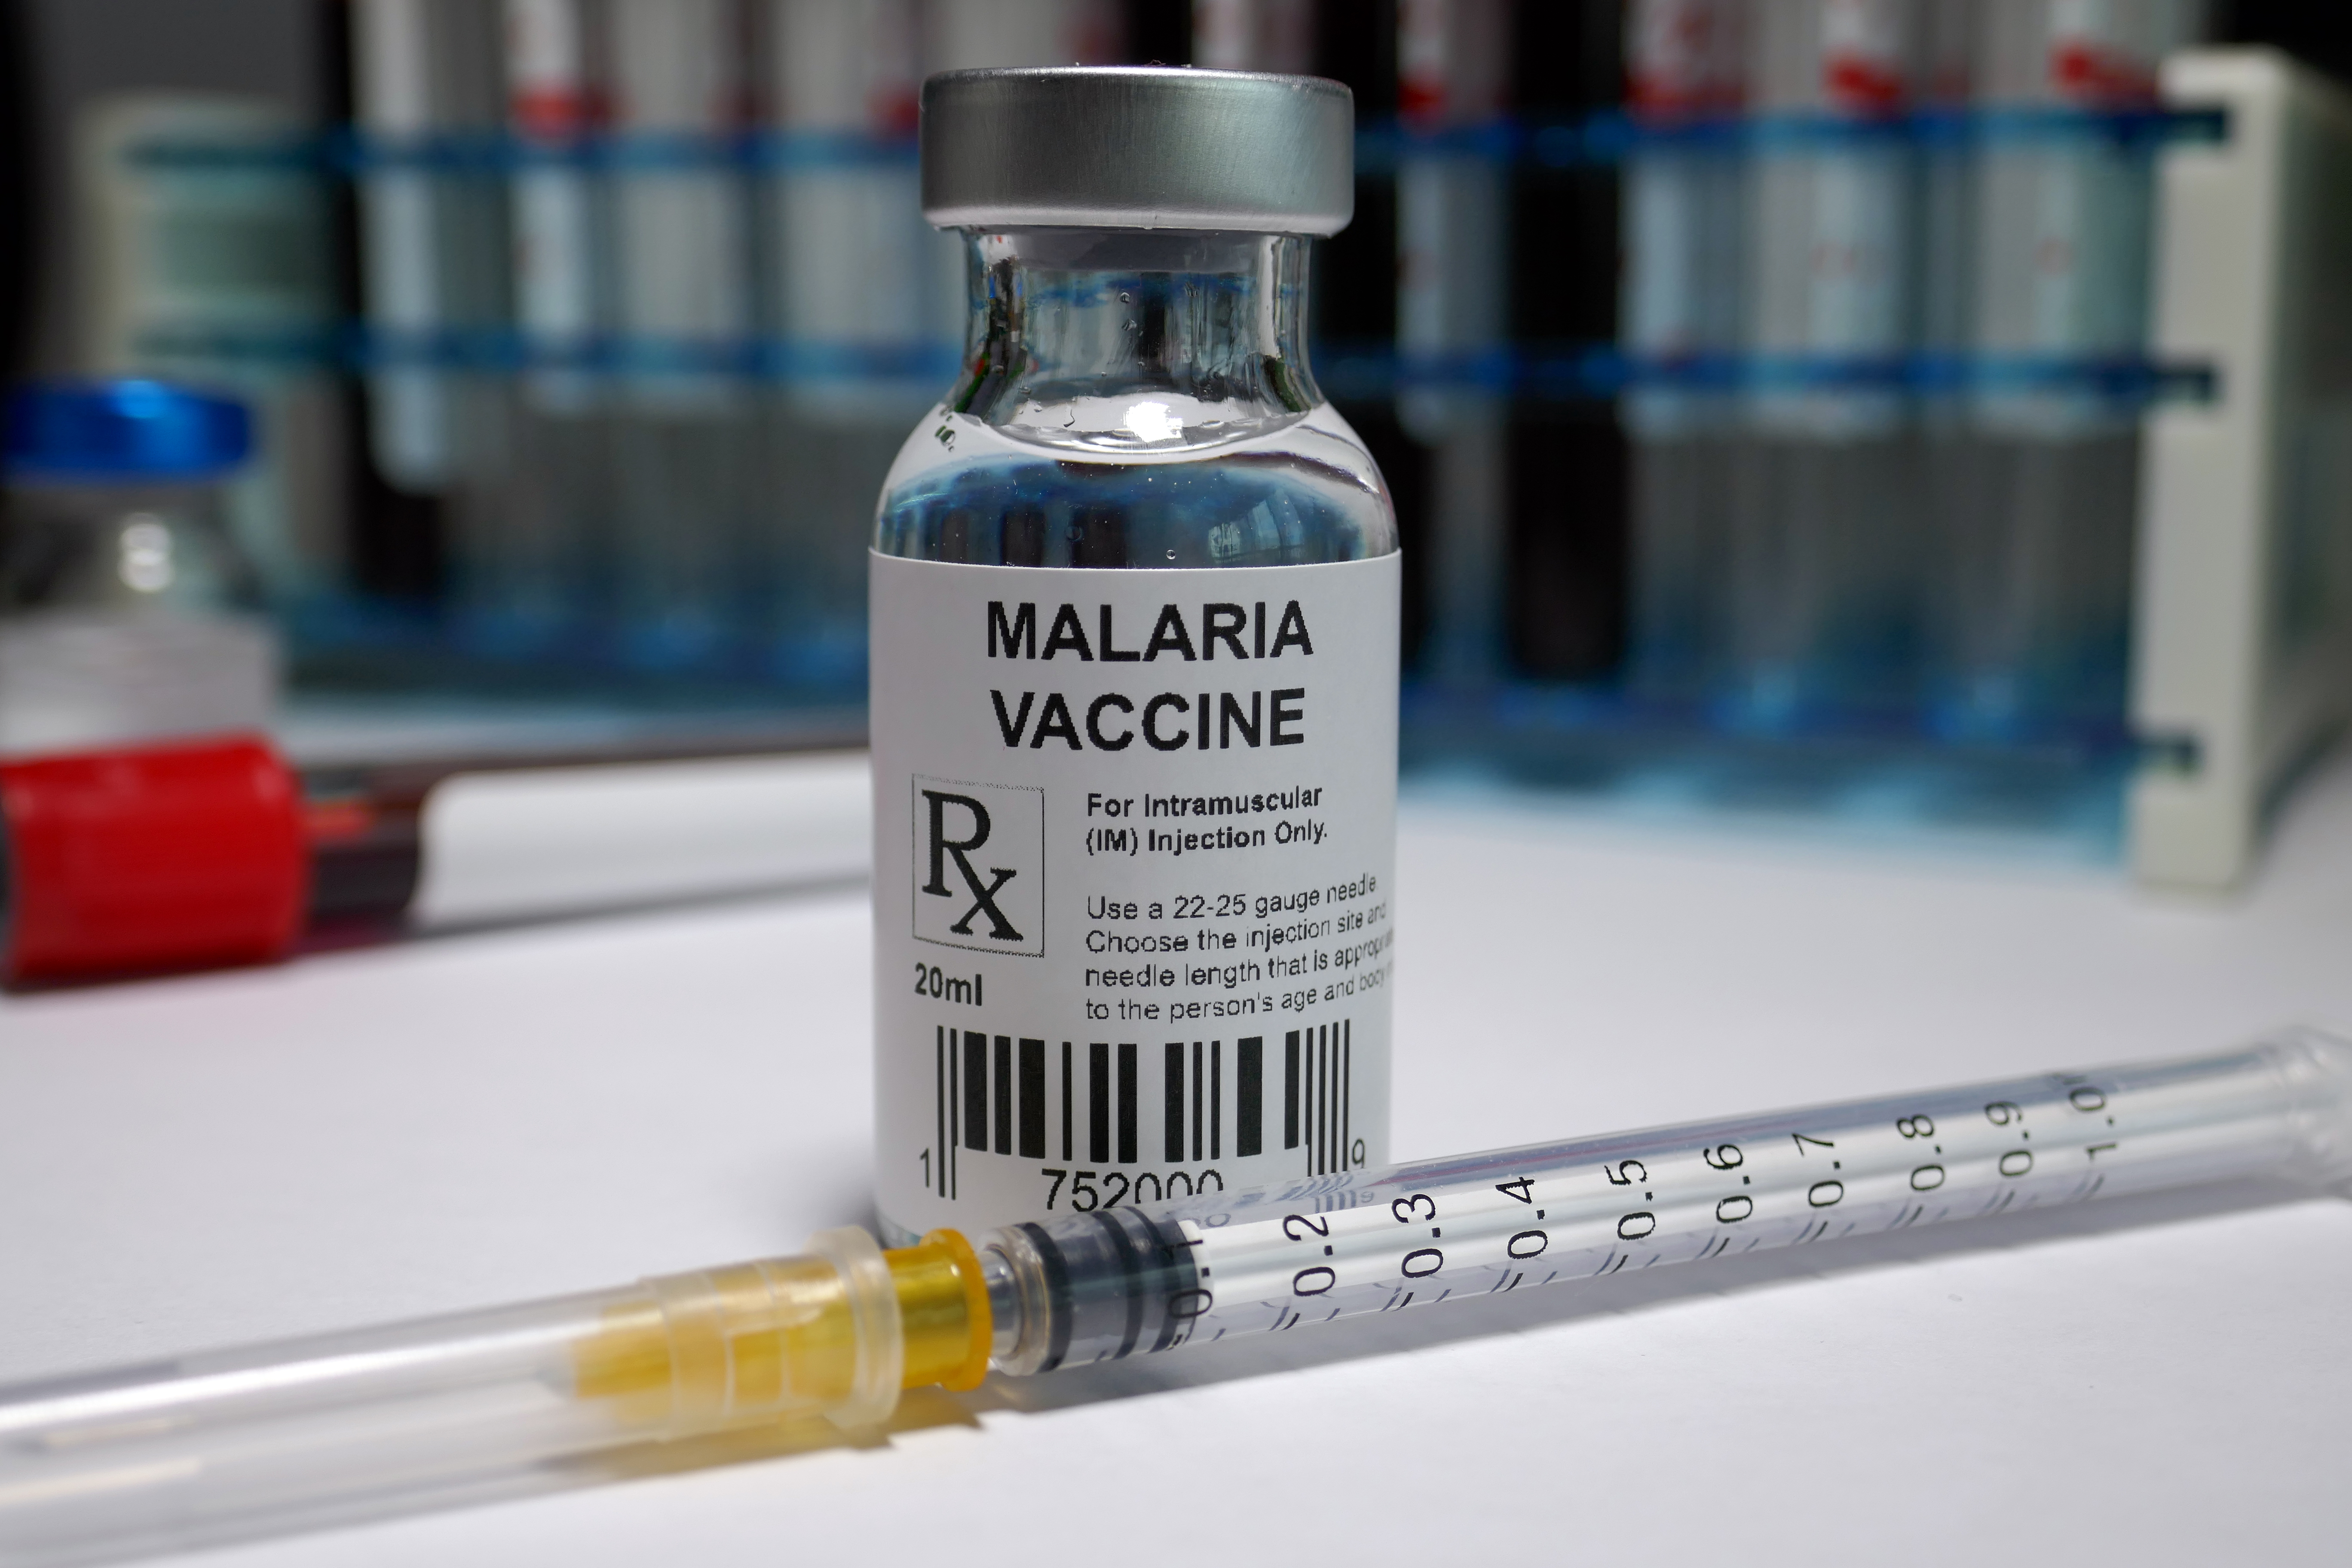 Pregnancy-Associated Malaria Vaccine Passes First Human Trial5472 x 3648